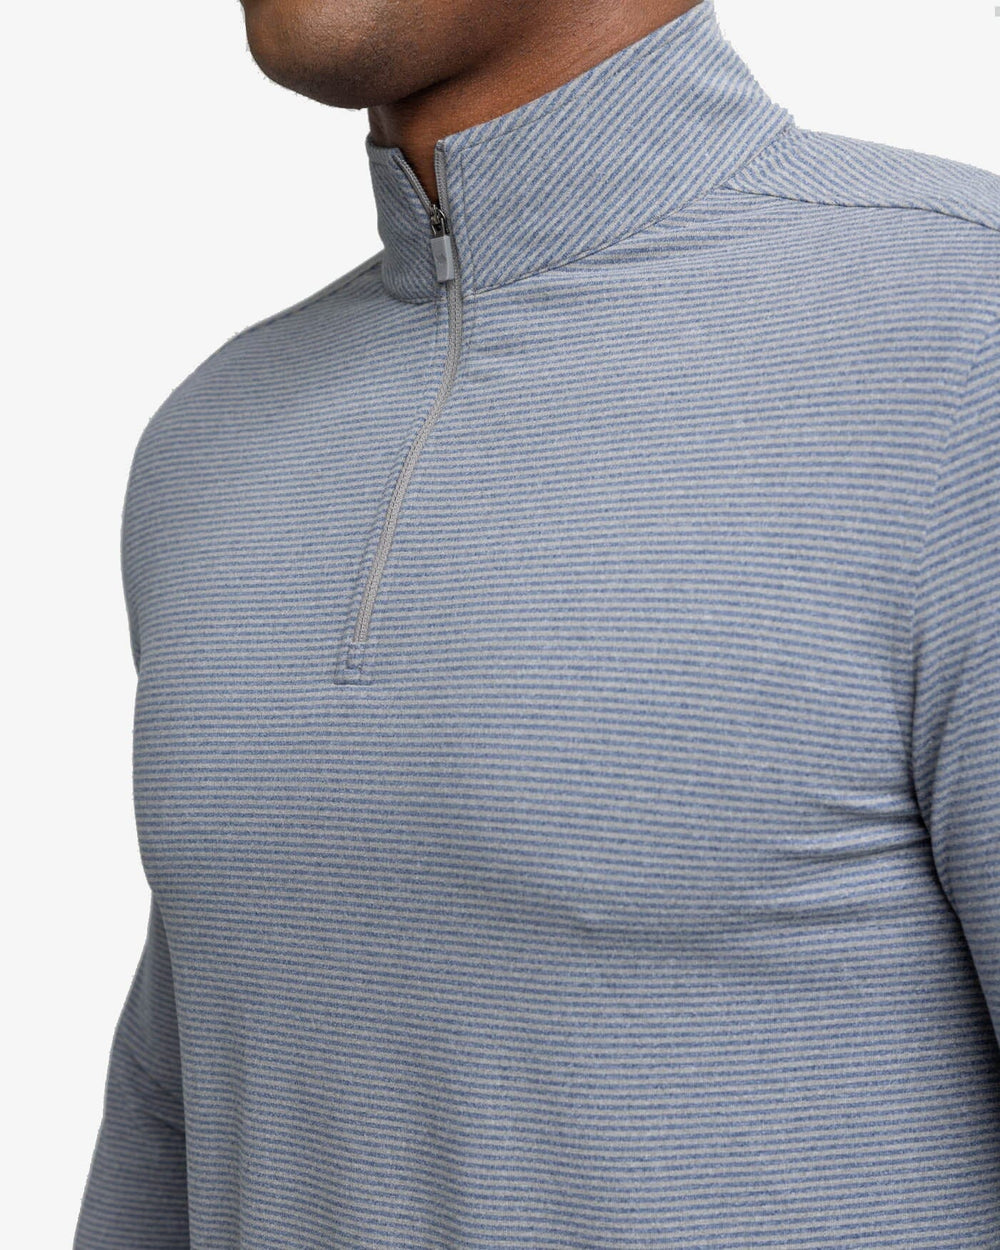 The detail view of the Southern Tide Cruiser Heather Micro-Stripe Performance Quarter Zip Pullover by Southern Tide - Heather Shadow Grey